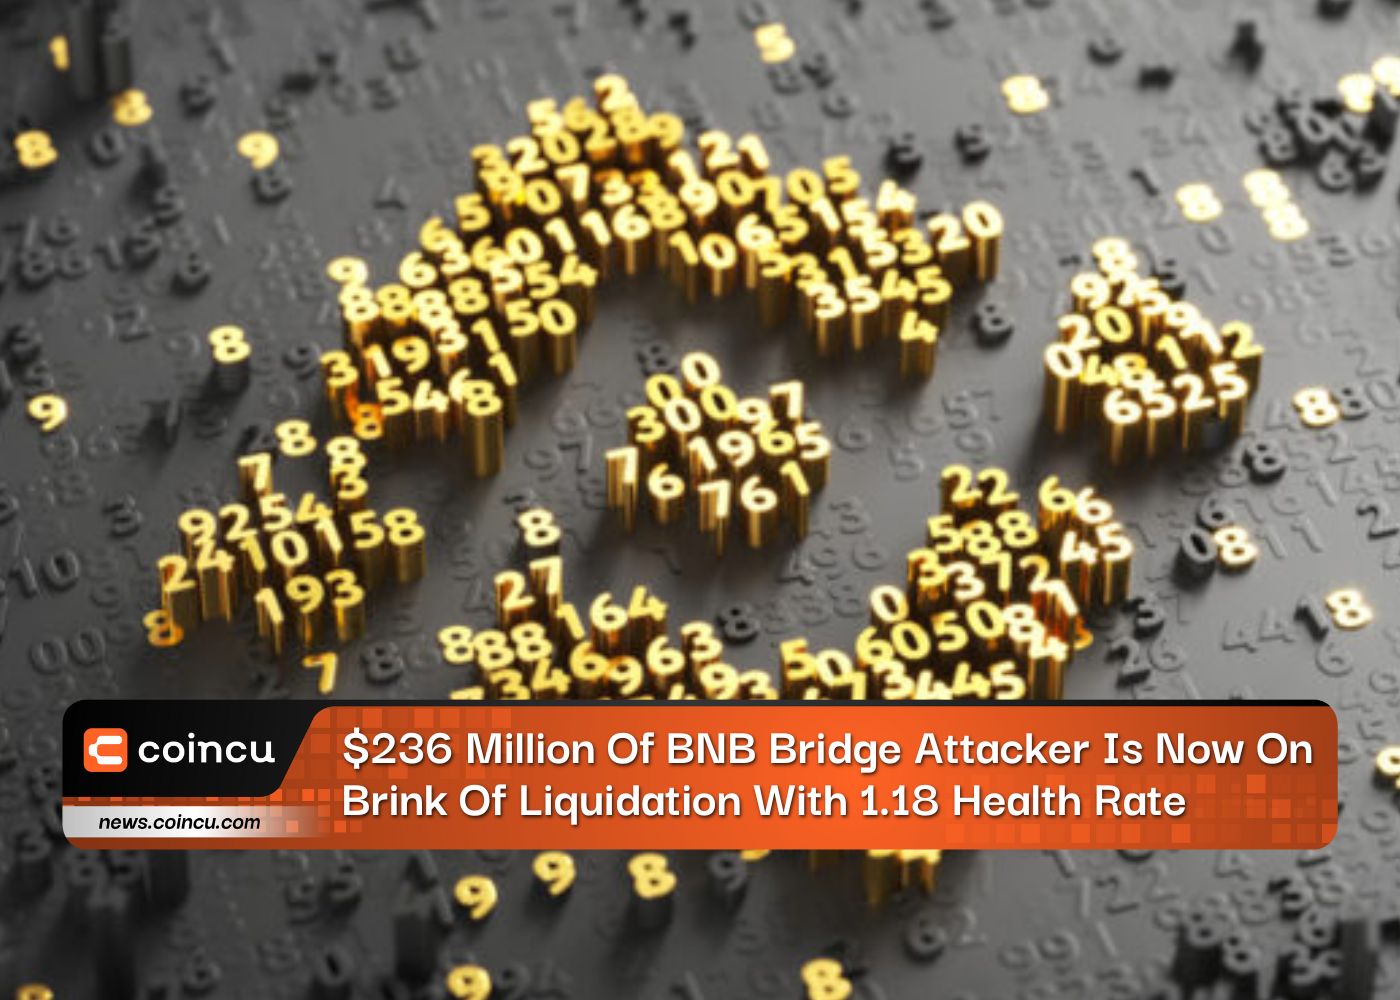 $236 Million Of BNB Bridge Attacker Is Now On Brink Of Liquidation With 1.18 Health Rate